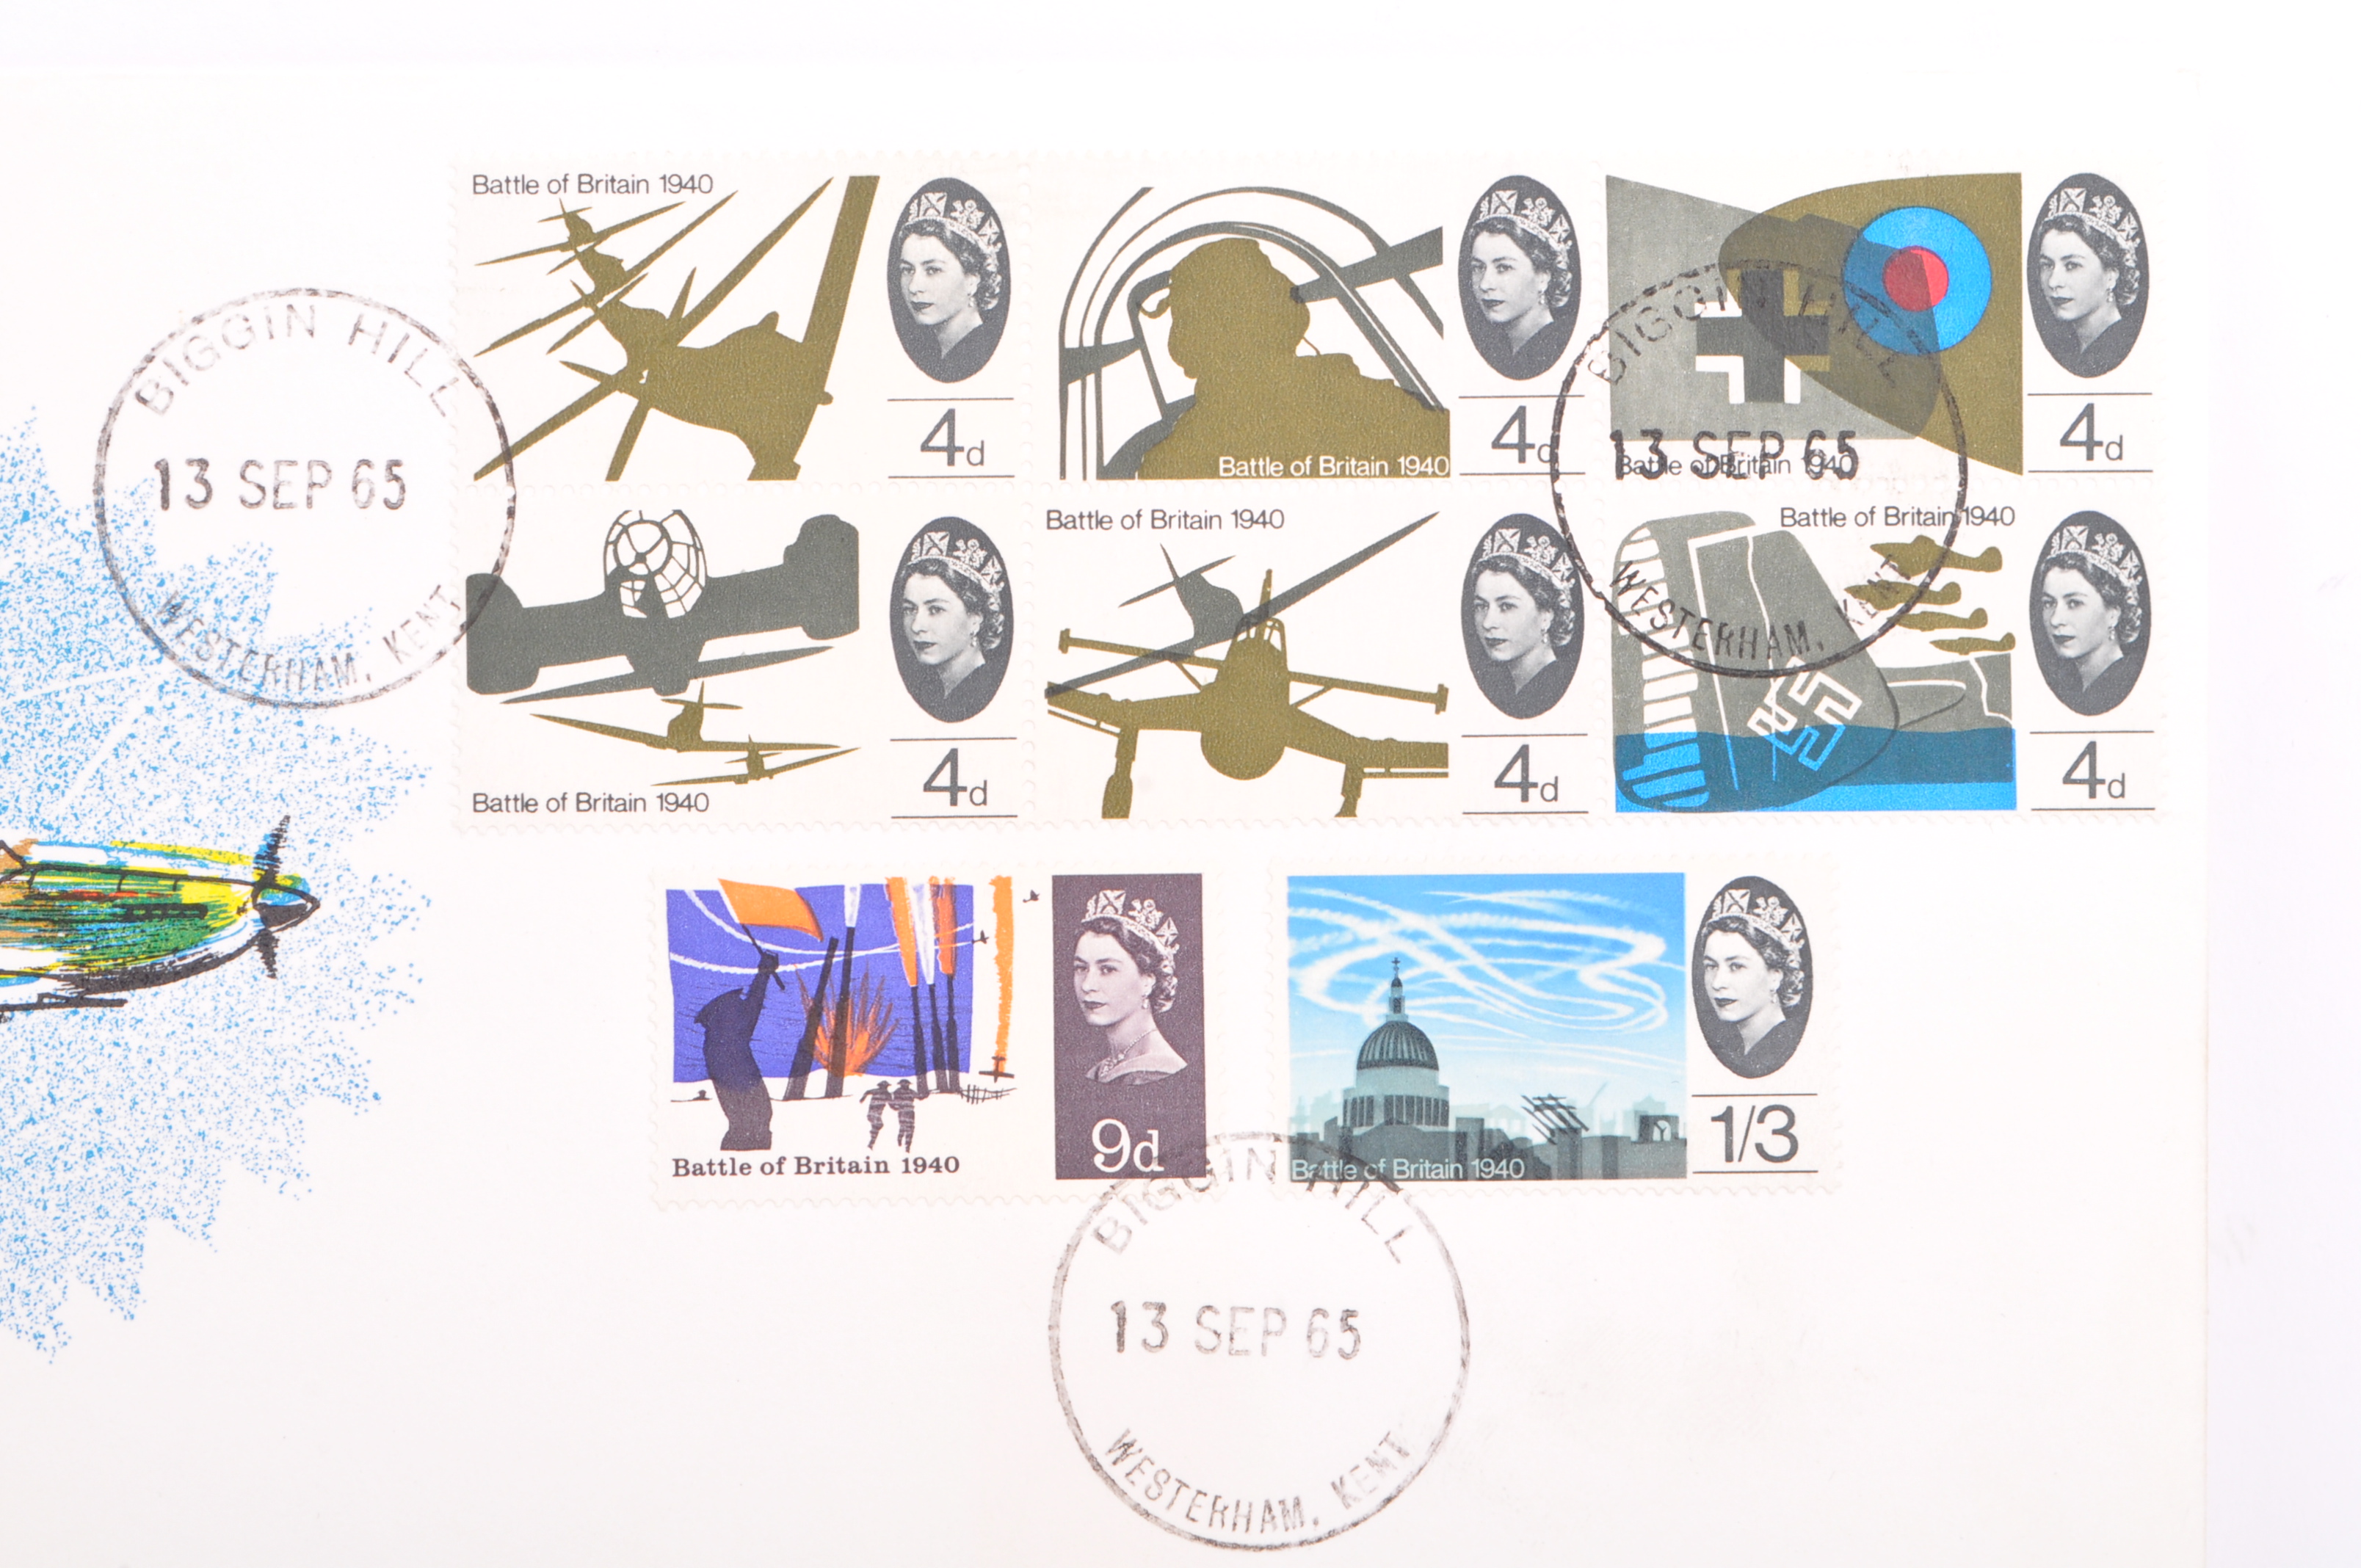 DOUGLAS BADER - BATTLE OF BRITAIN FIRST DAY COVER - Image 3 of 6